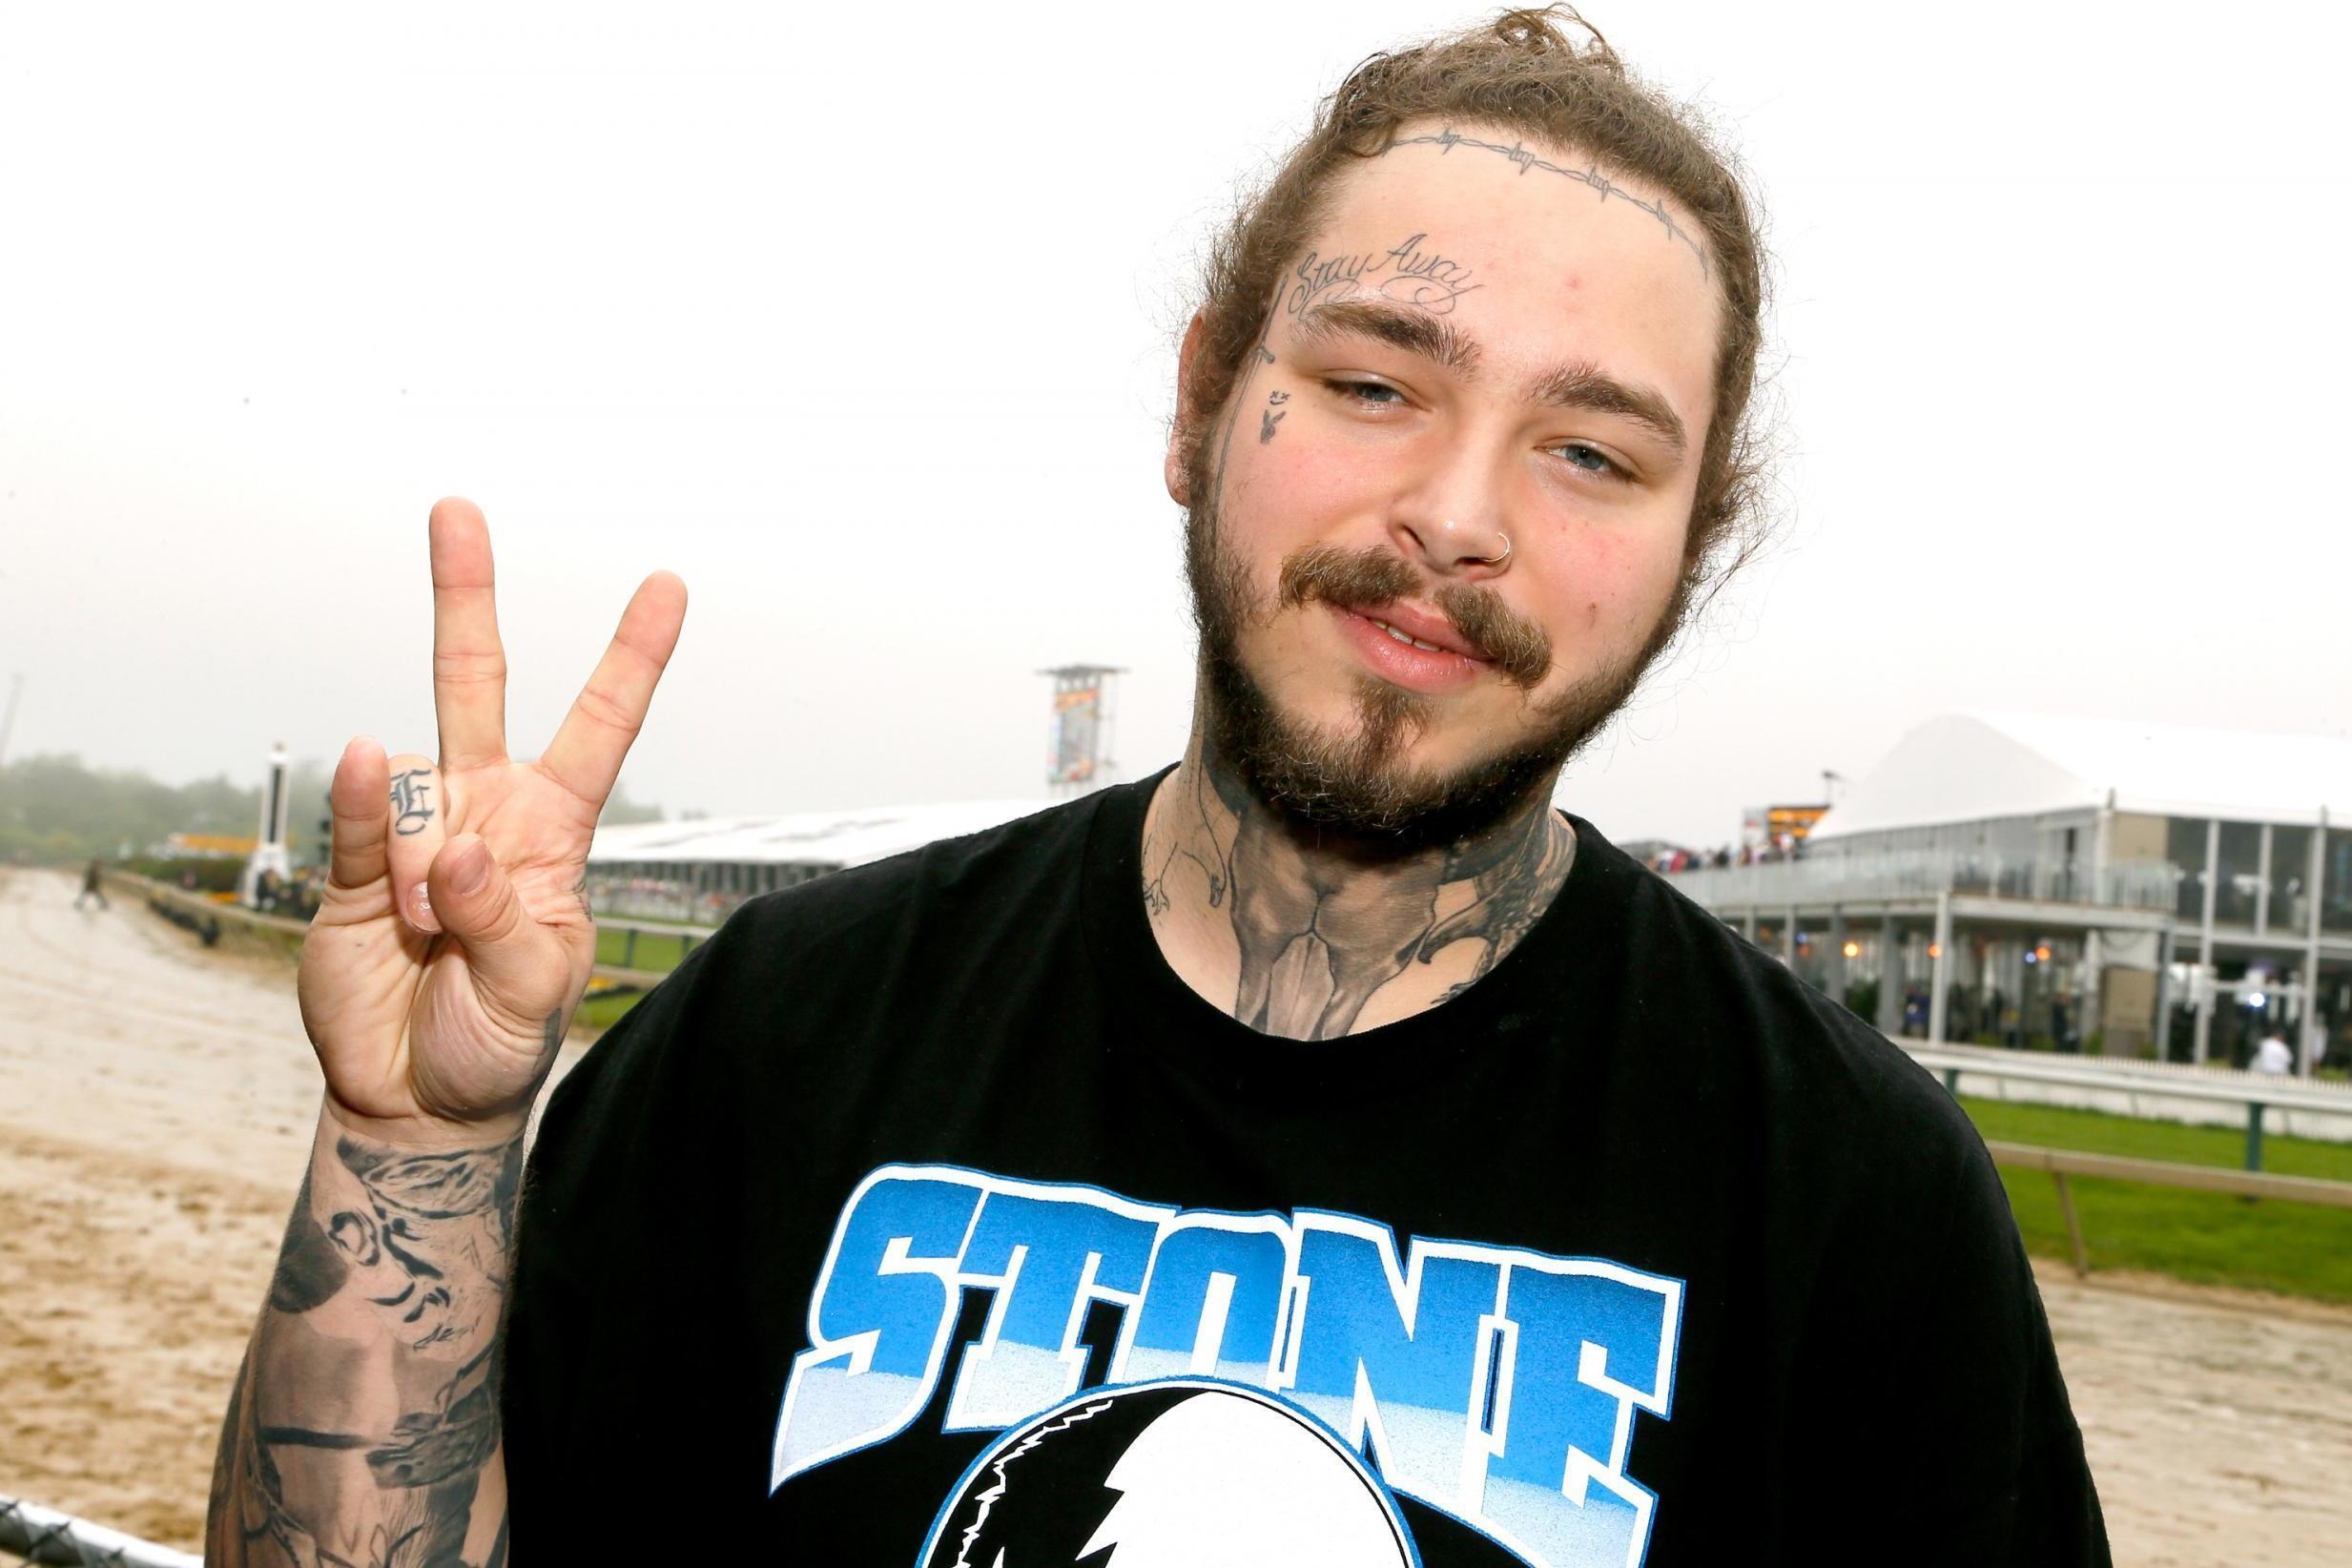 Post Malone confirms he is safe after emergency plane landing (Getty)